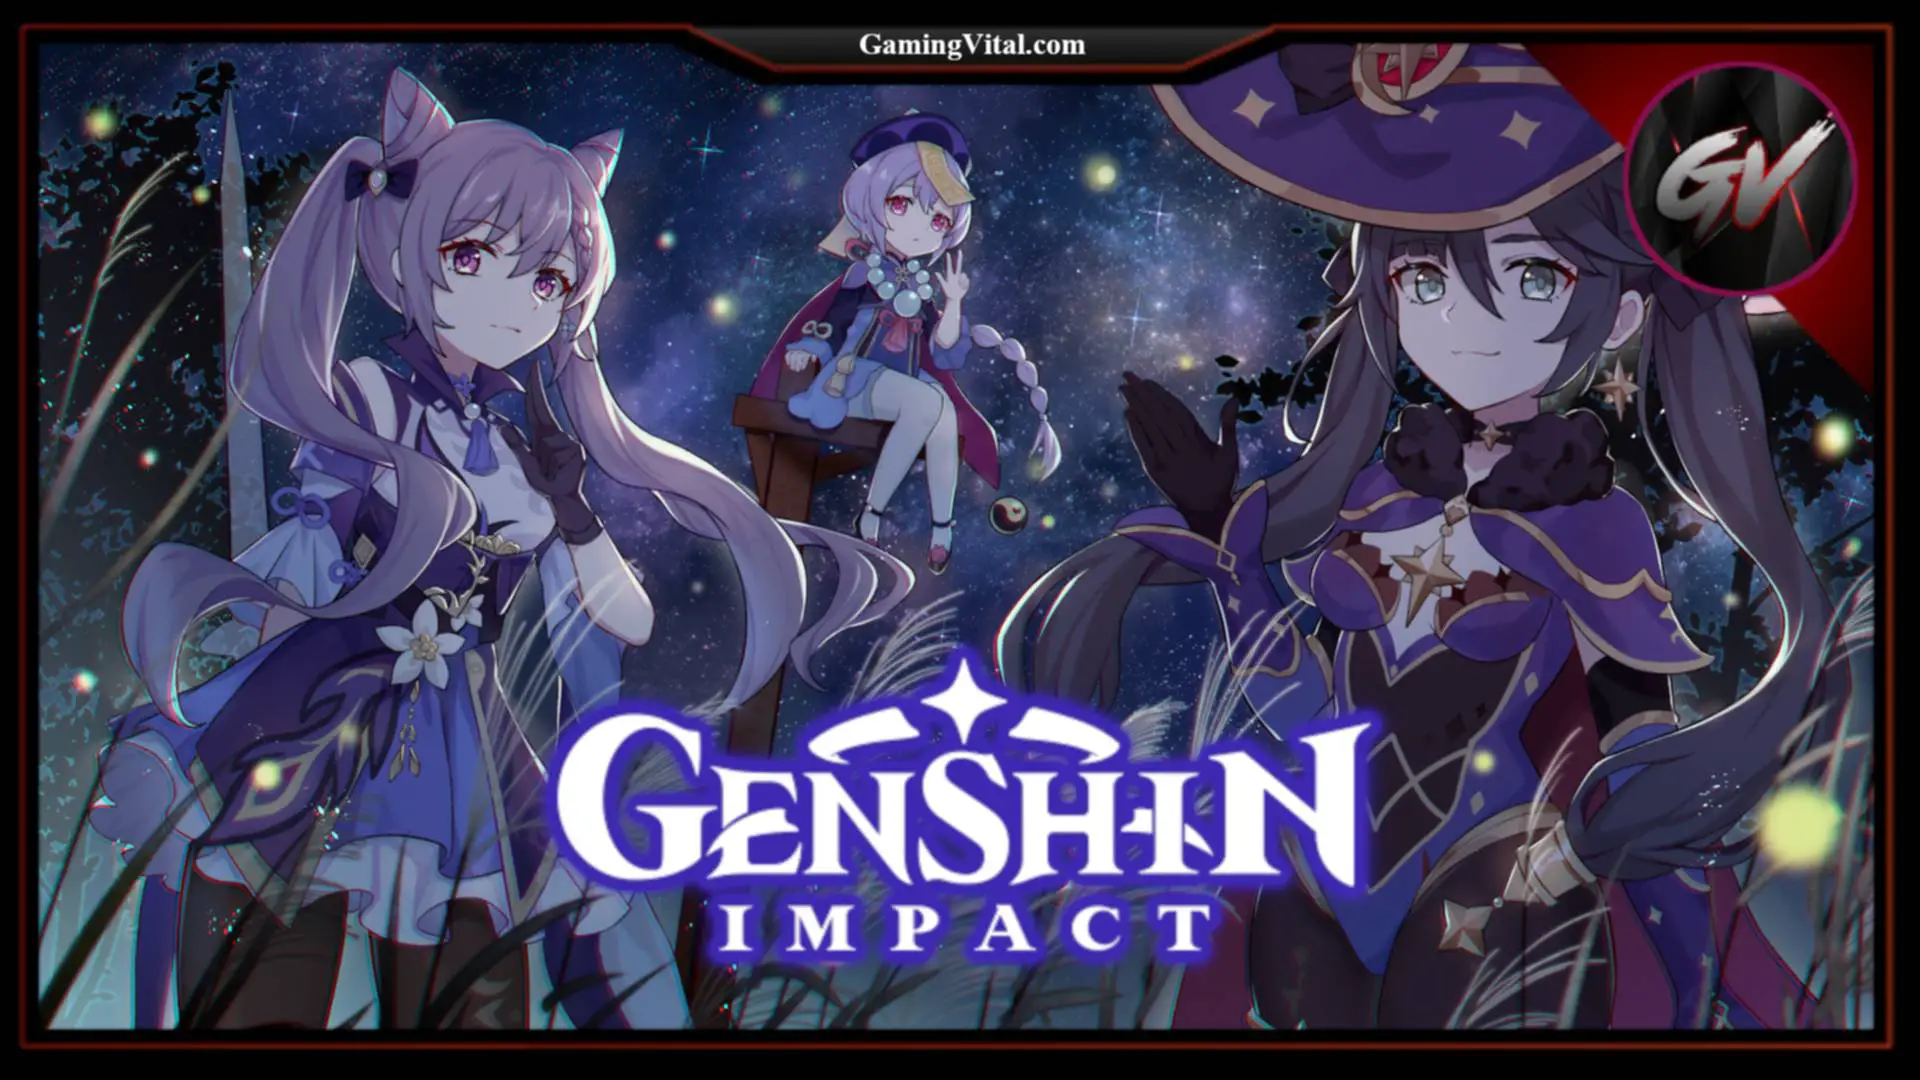 Genshin Impact Review: Best RPG Anime Game To Download & Play Right Now